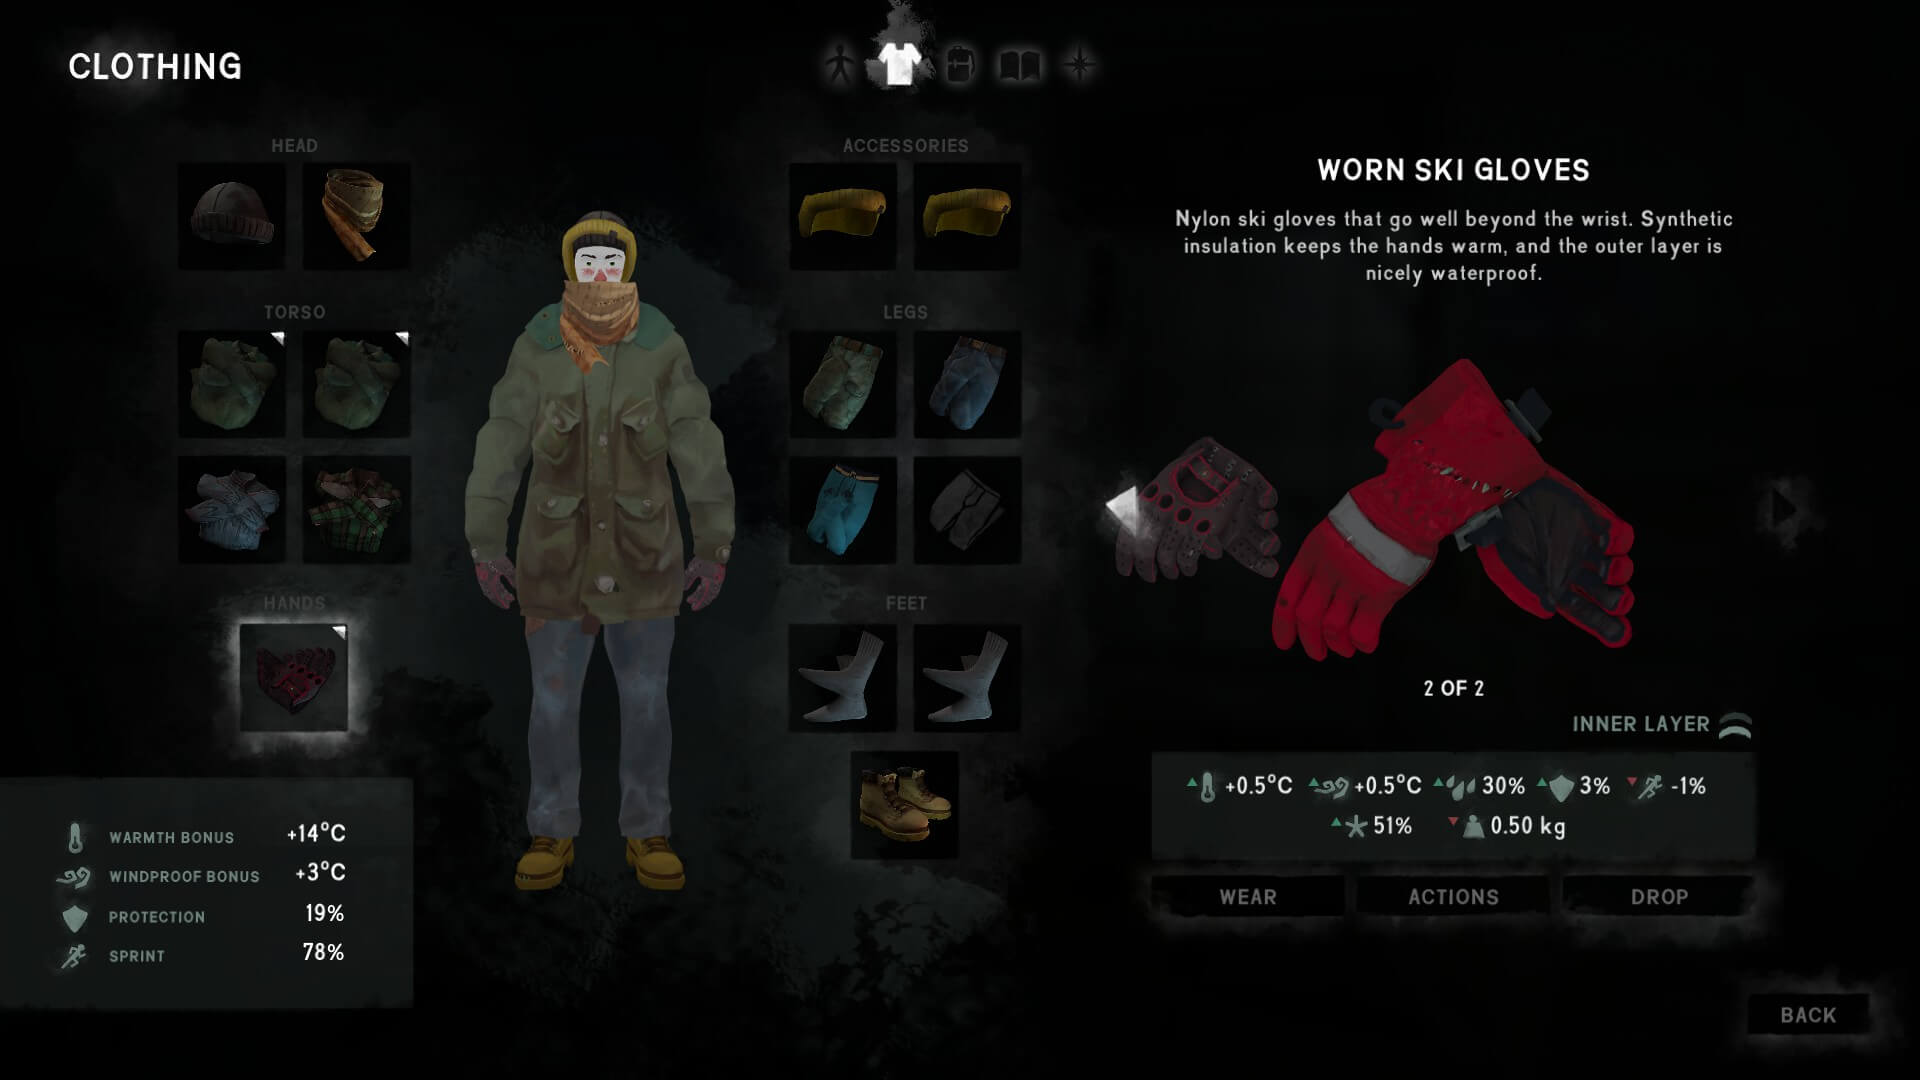 long dark best clothes, the long dark accessories, the long dark best clothing, the long dark clothing, the long dark clothing chart, the long dark clothing guide